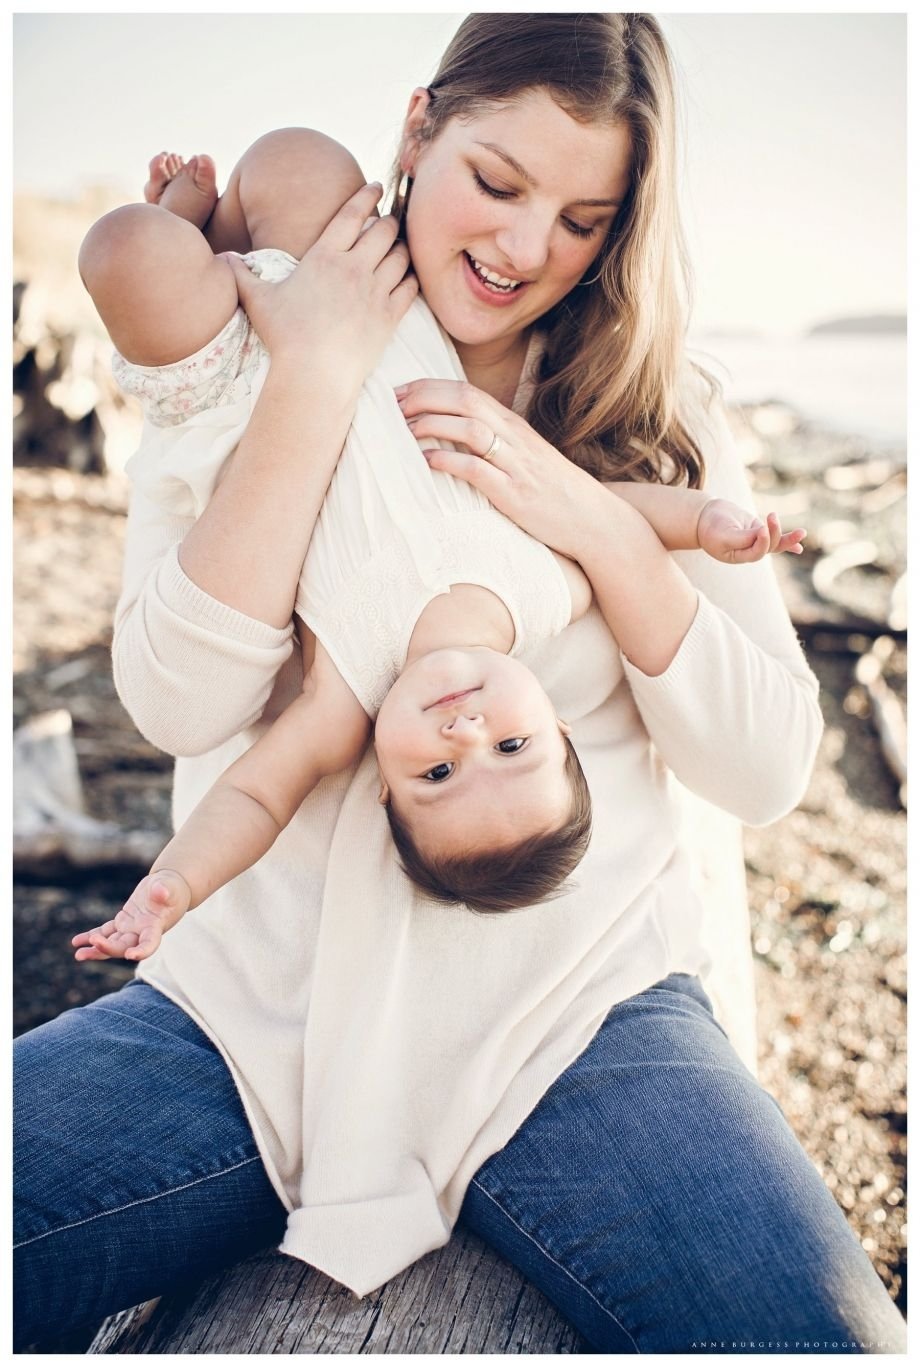 10 Attractive Mom And Baby Picture Ideas mother daughter poses mom and baby photo ideas mom and baby poses 2022